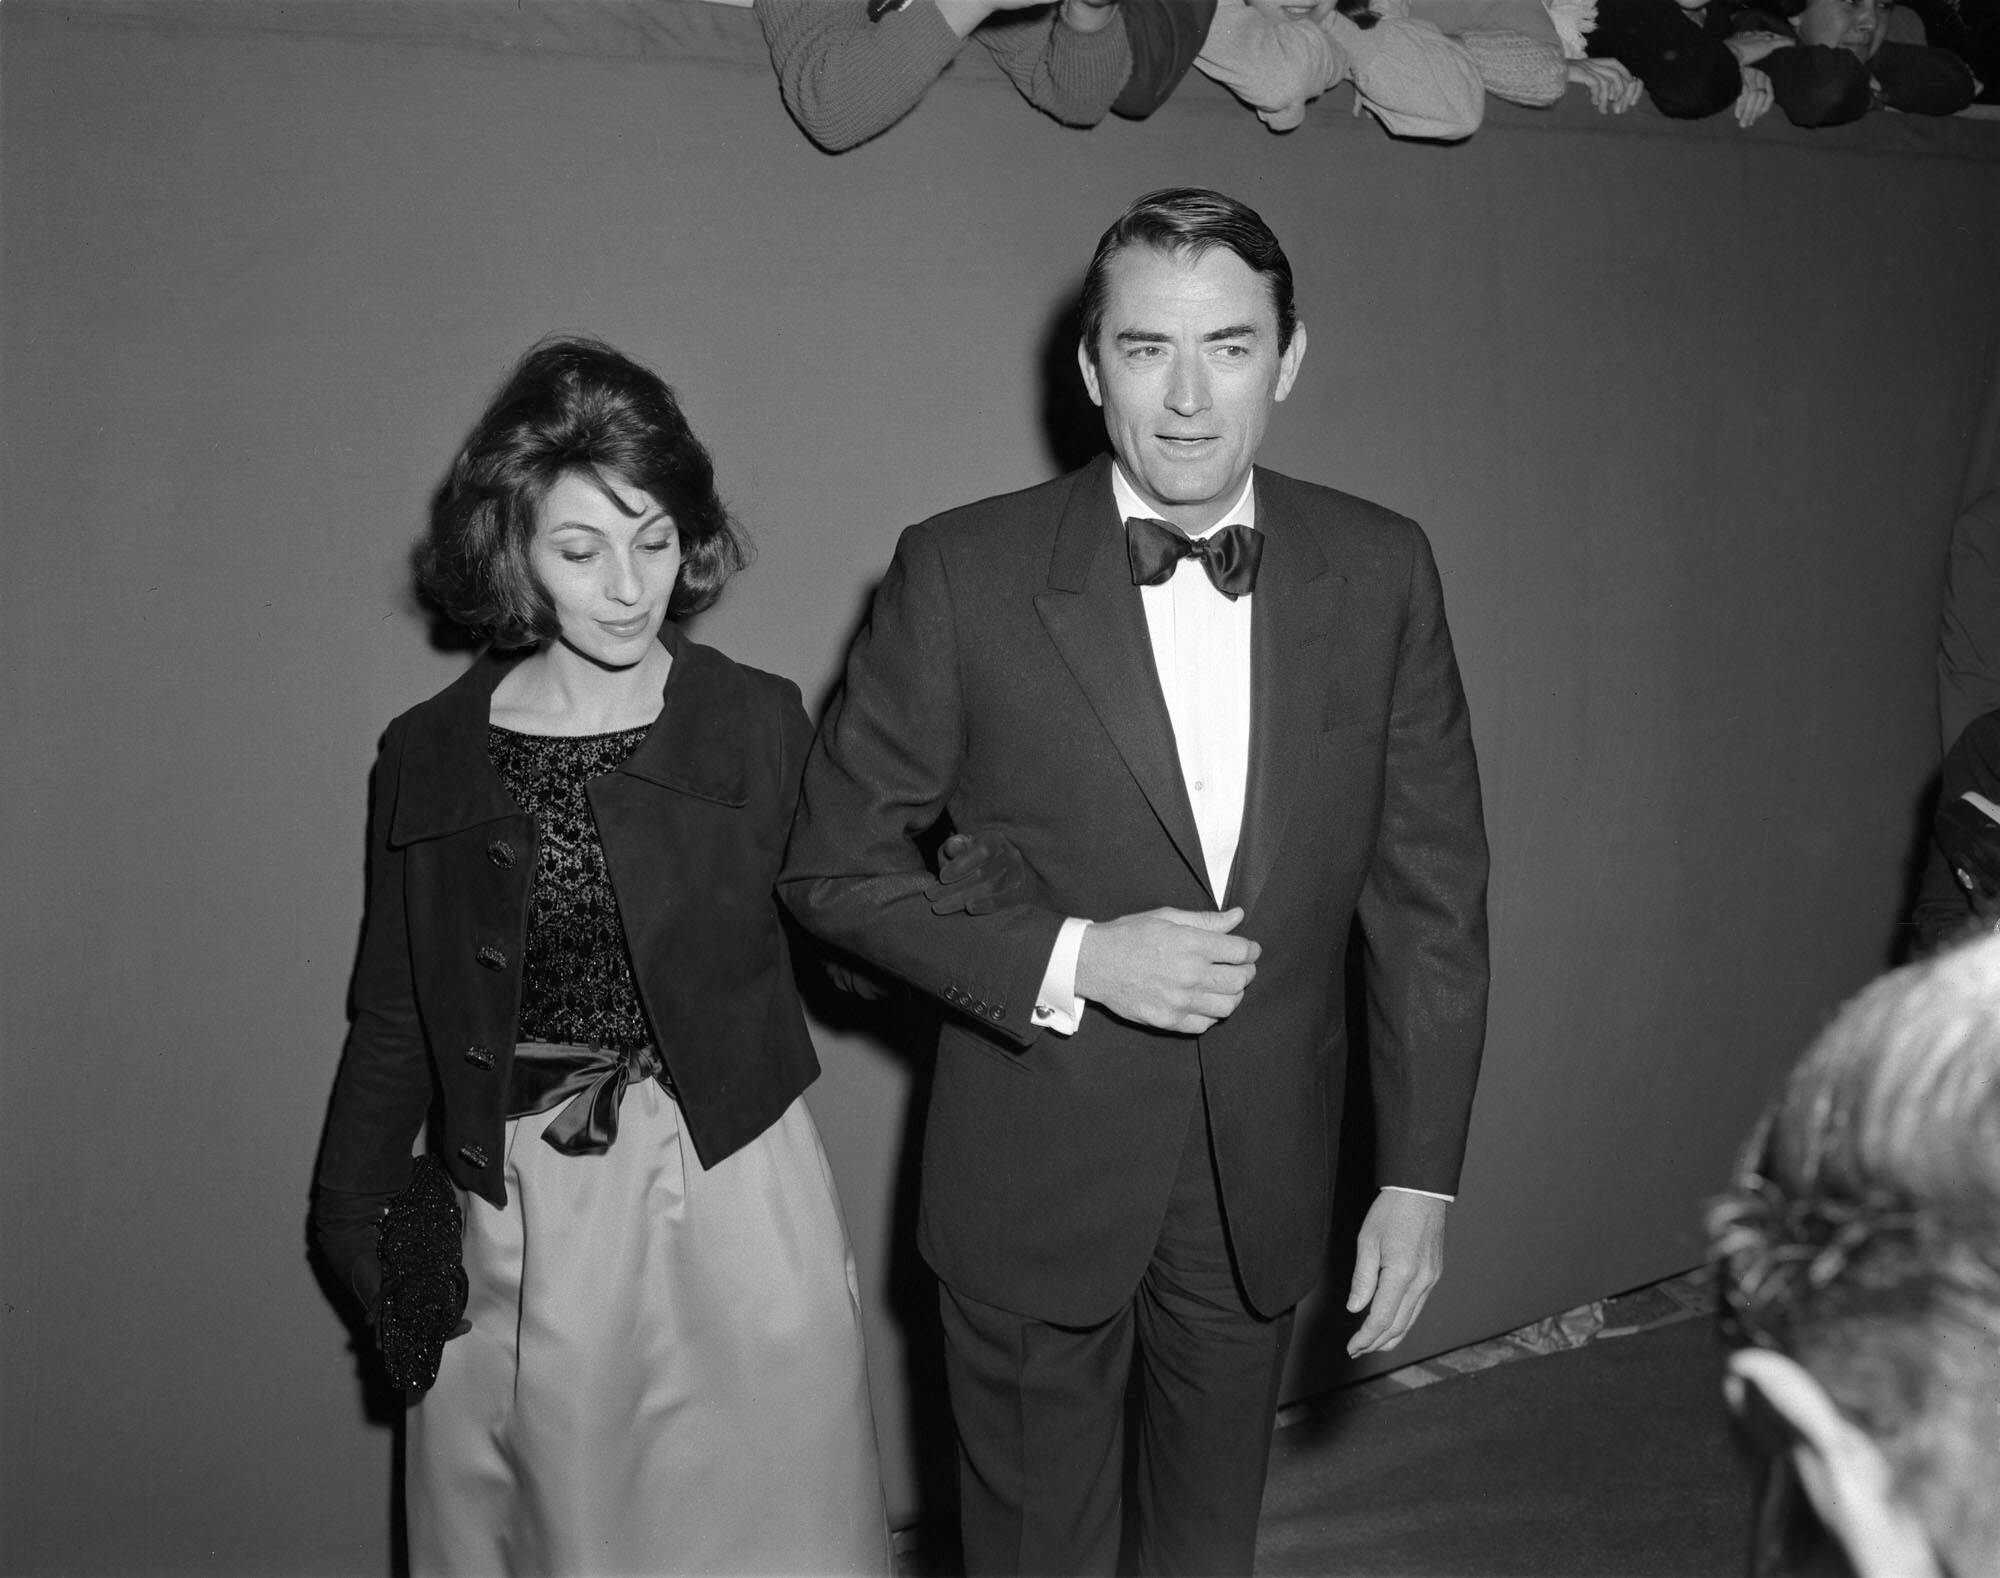 Gregory Peck | Oscars.org | Academy of Motion Picture Arts and Sciences